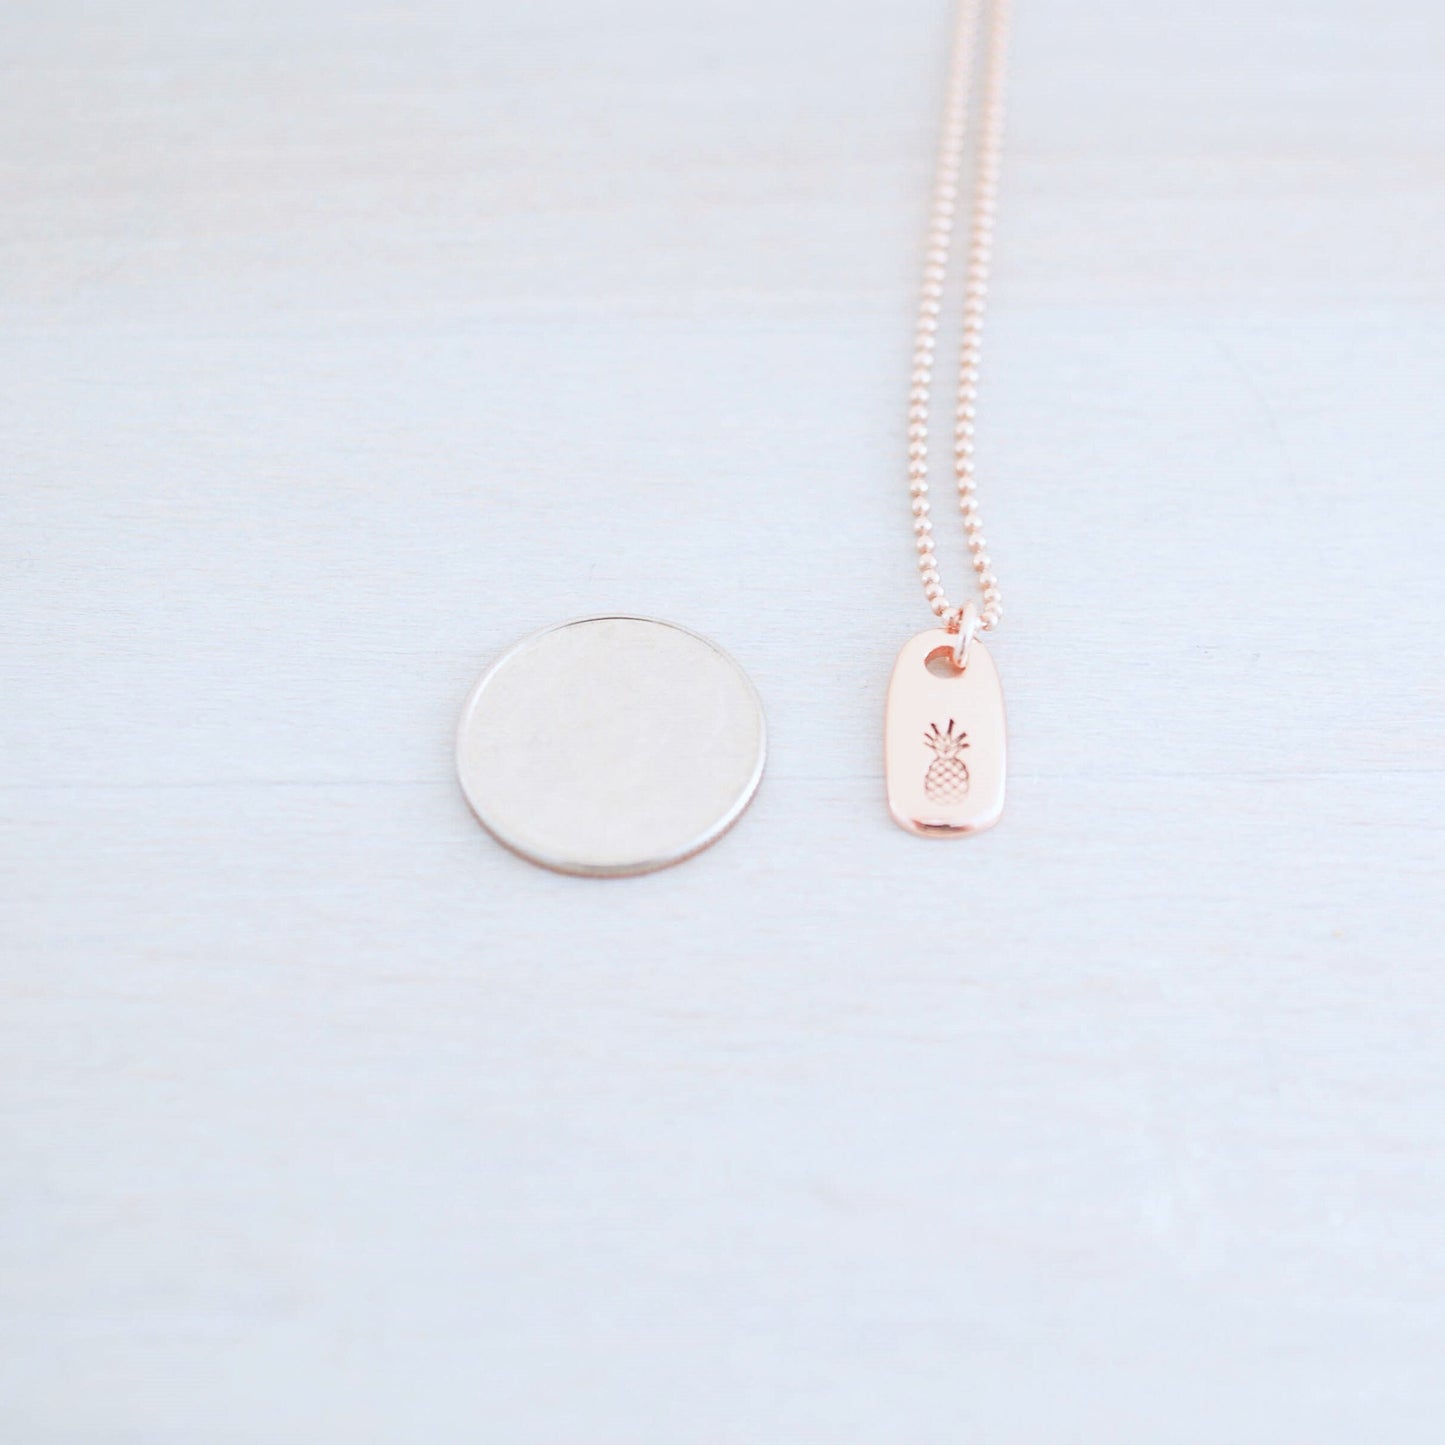 Dainty rose gold pineapple necklace next to dime